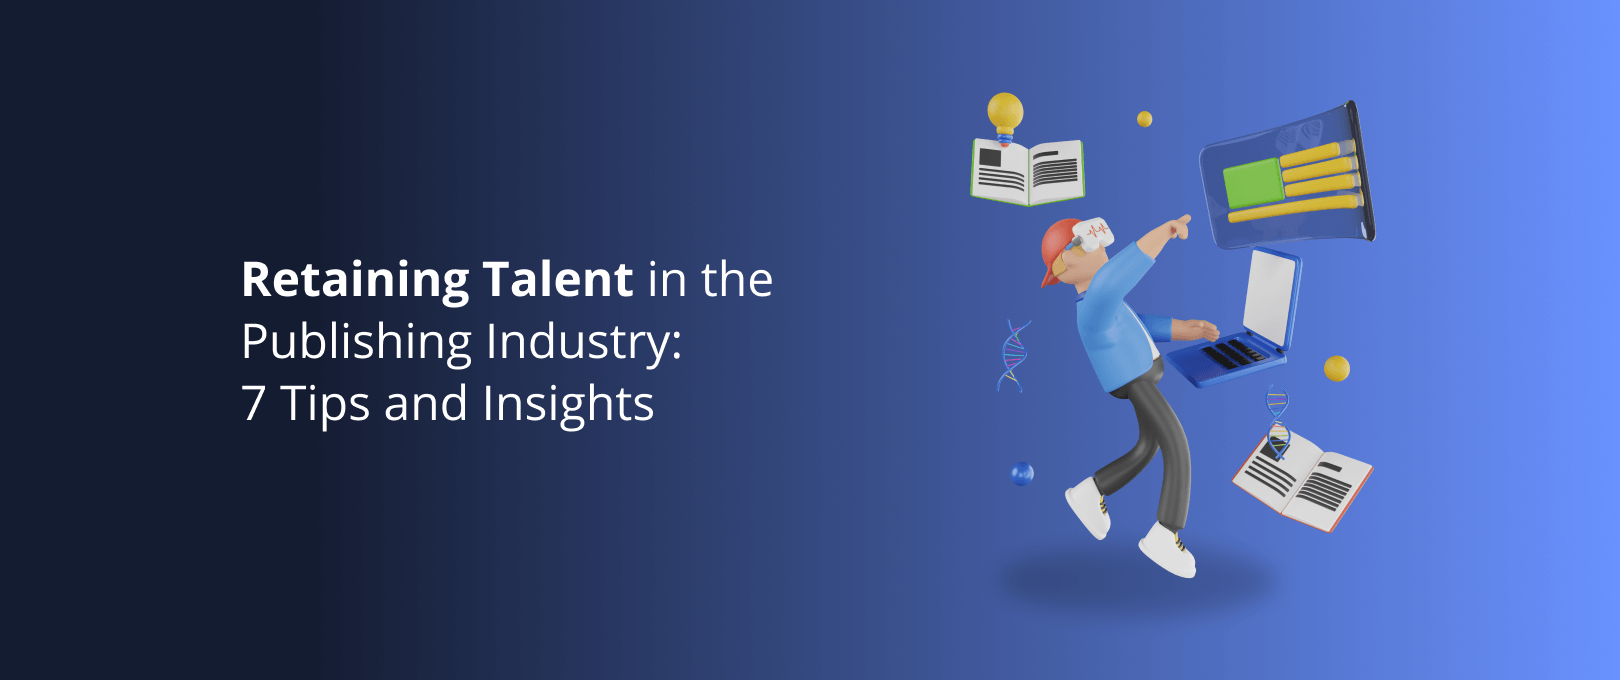 Retaining Talent in the Publishing Industry: 7 Tips and Insights - DevriX